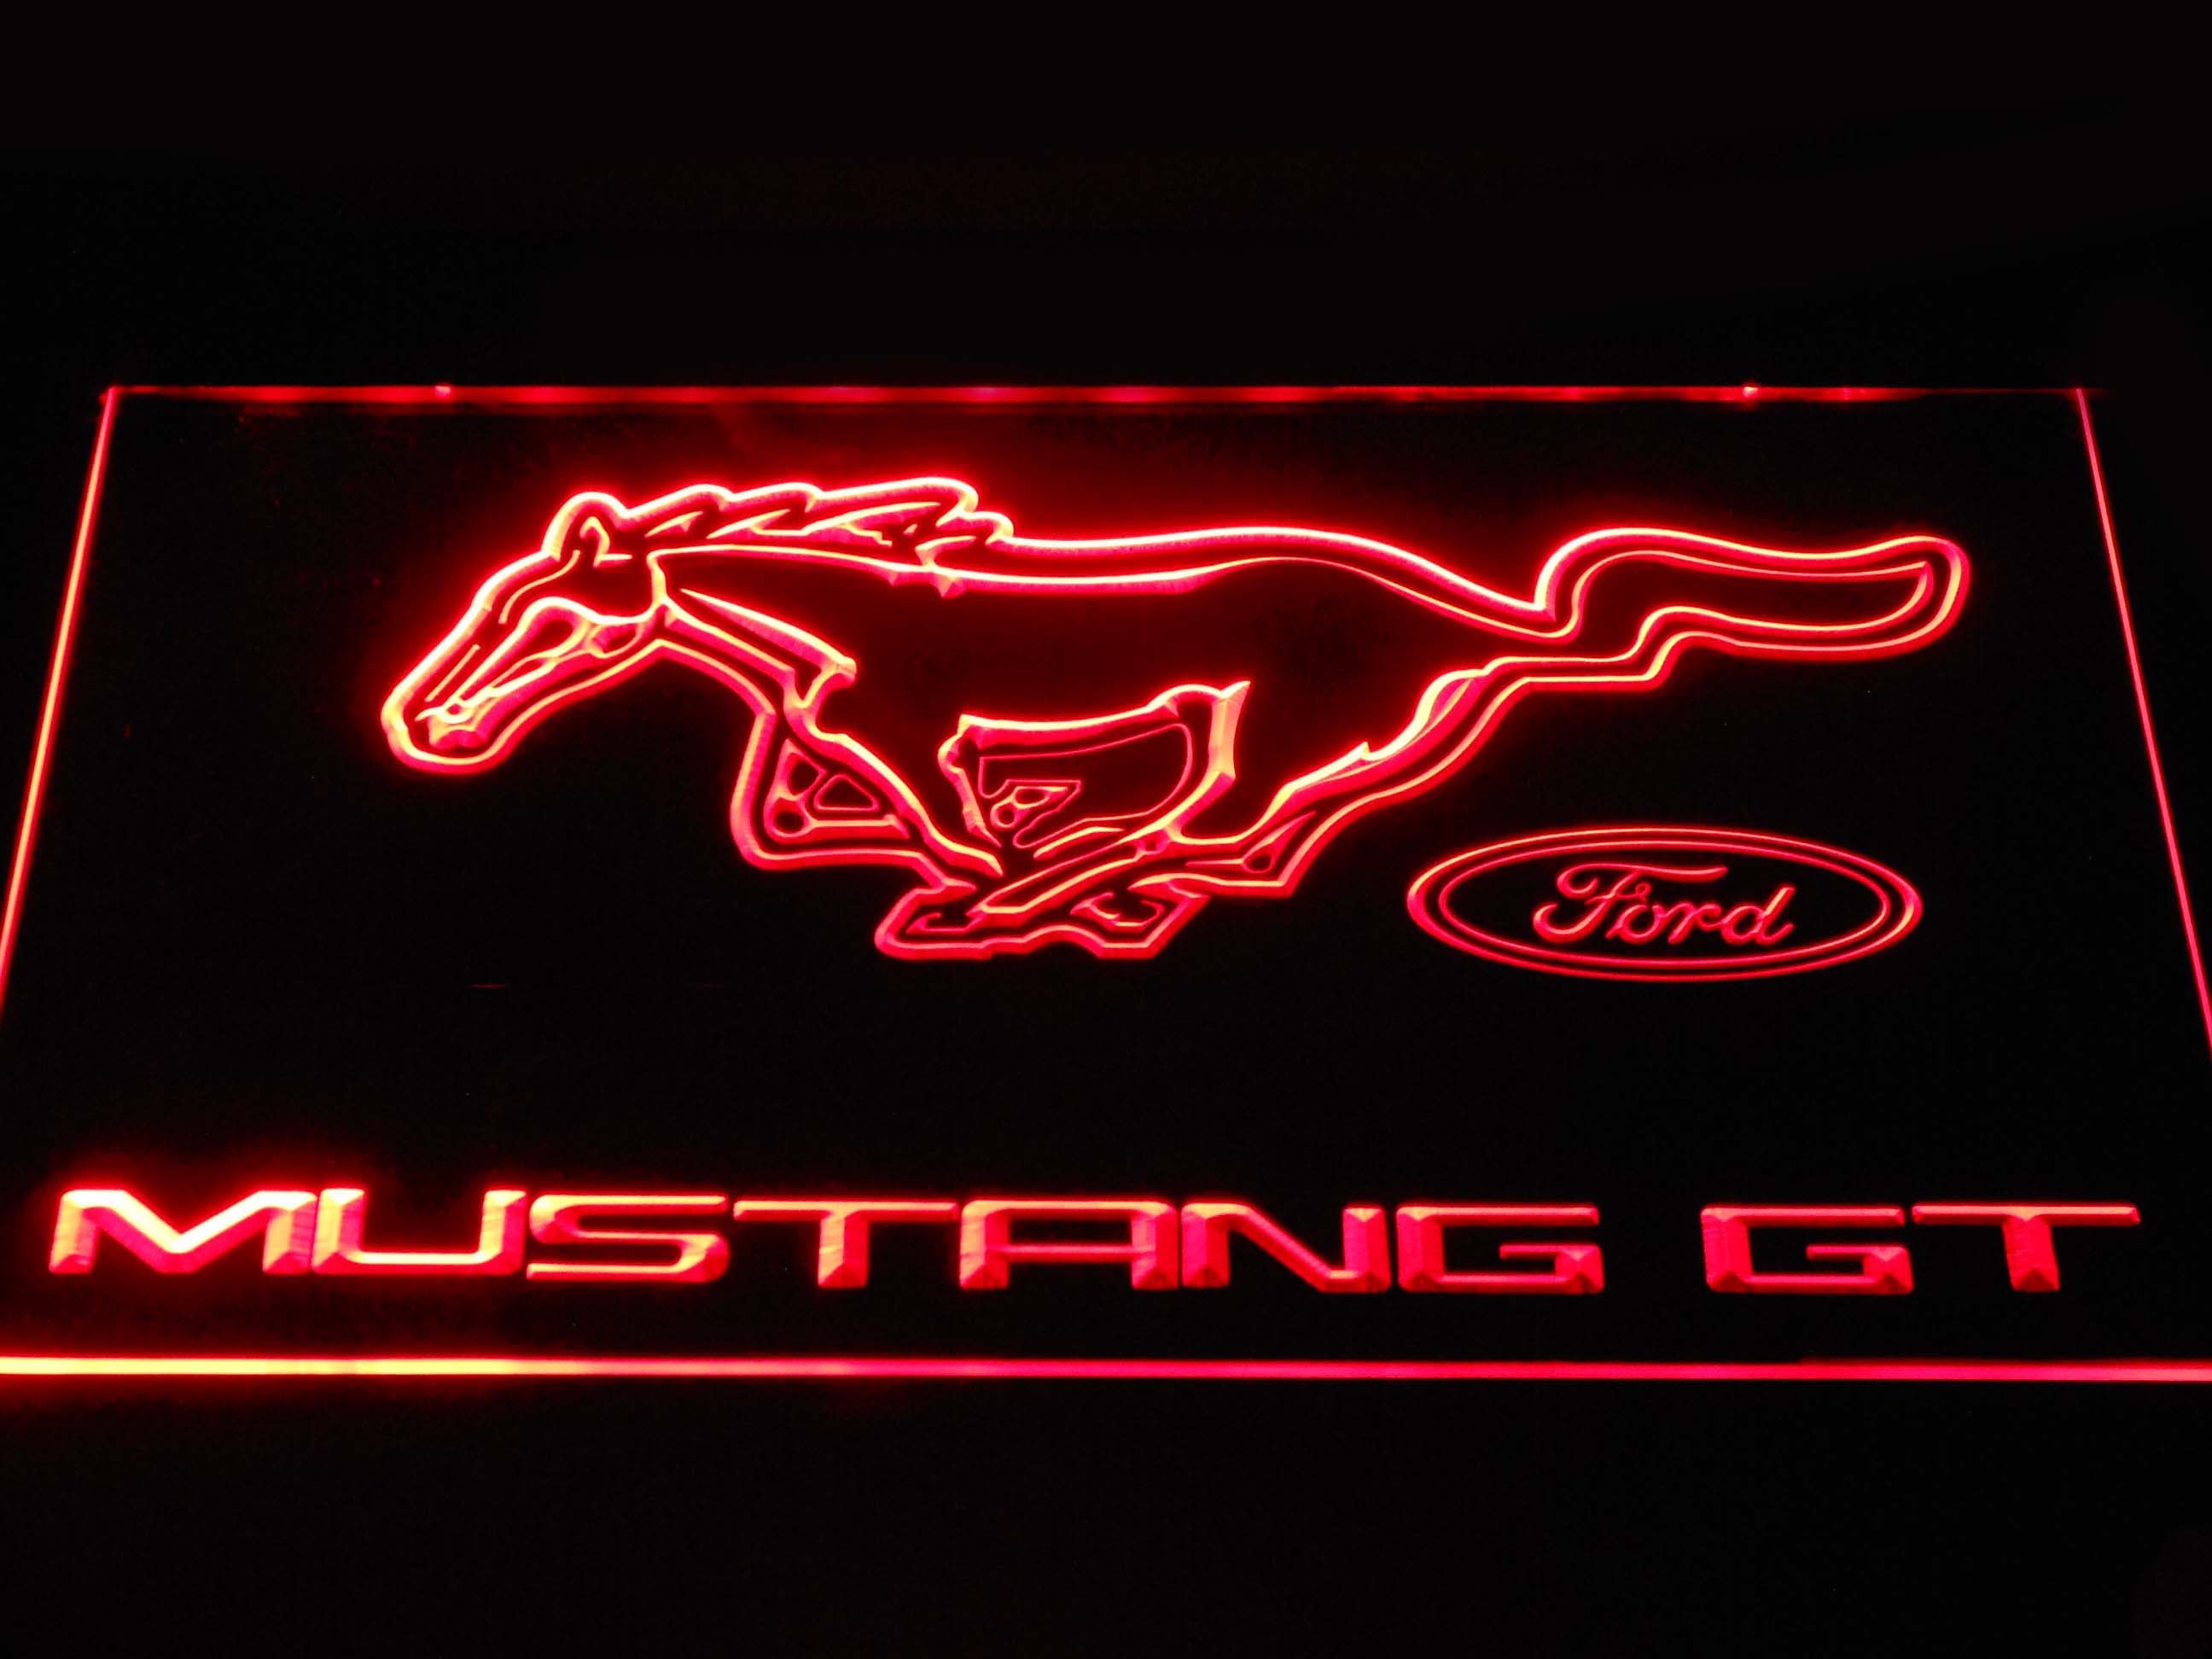 Ford Mustang GT Neon Light LED Sign